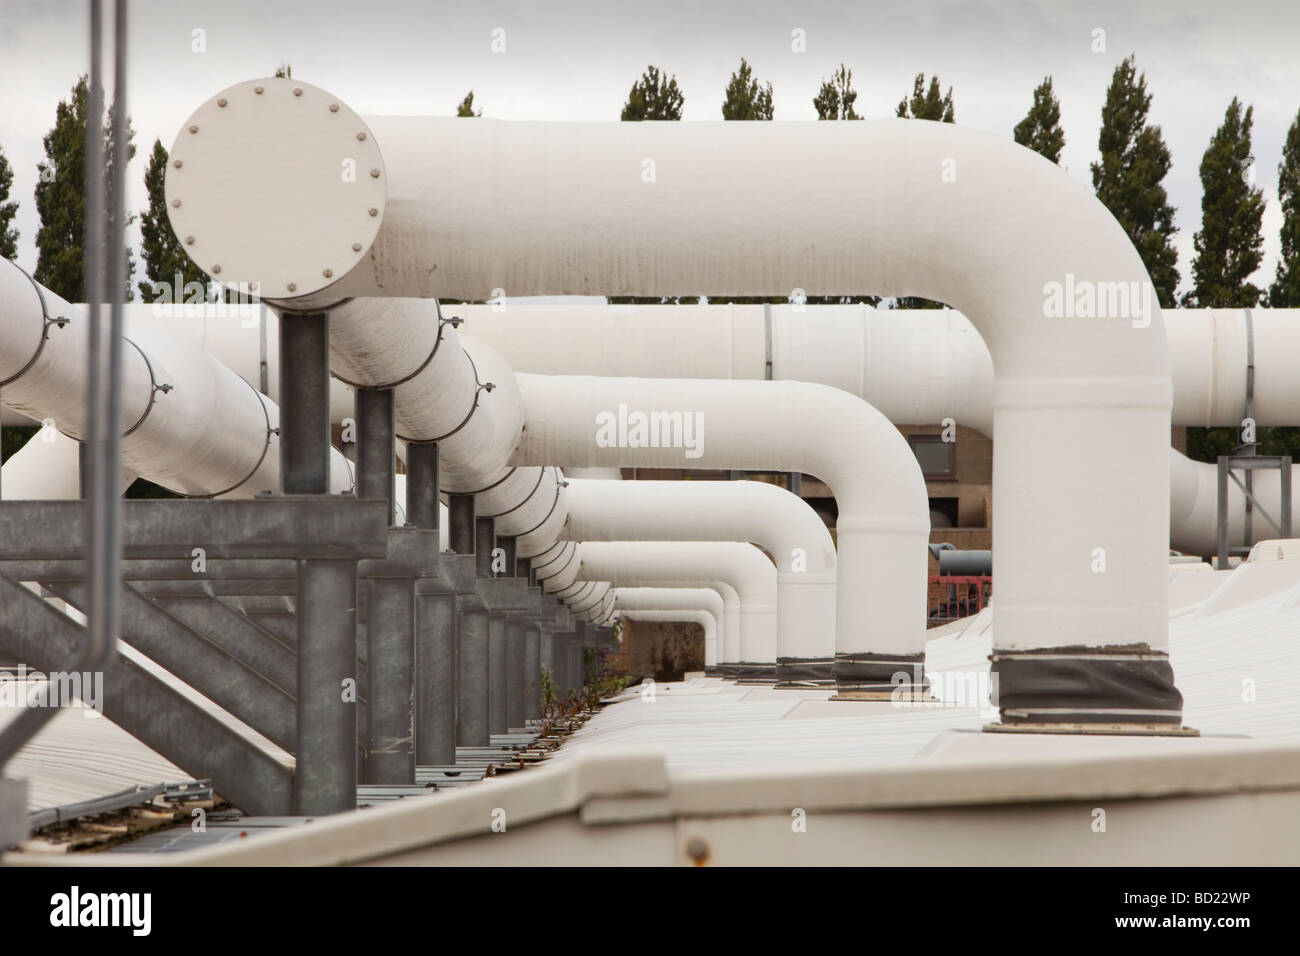 The odour supressant plant at Daveyhulme wastewater treatment plant in Manchester UK Stock Photo